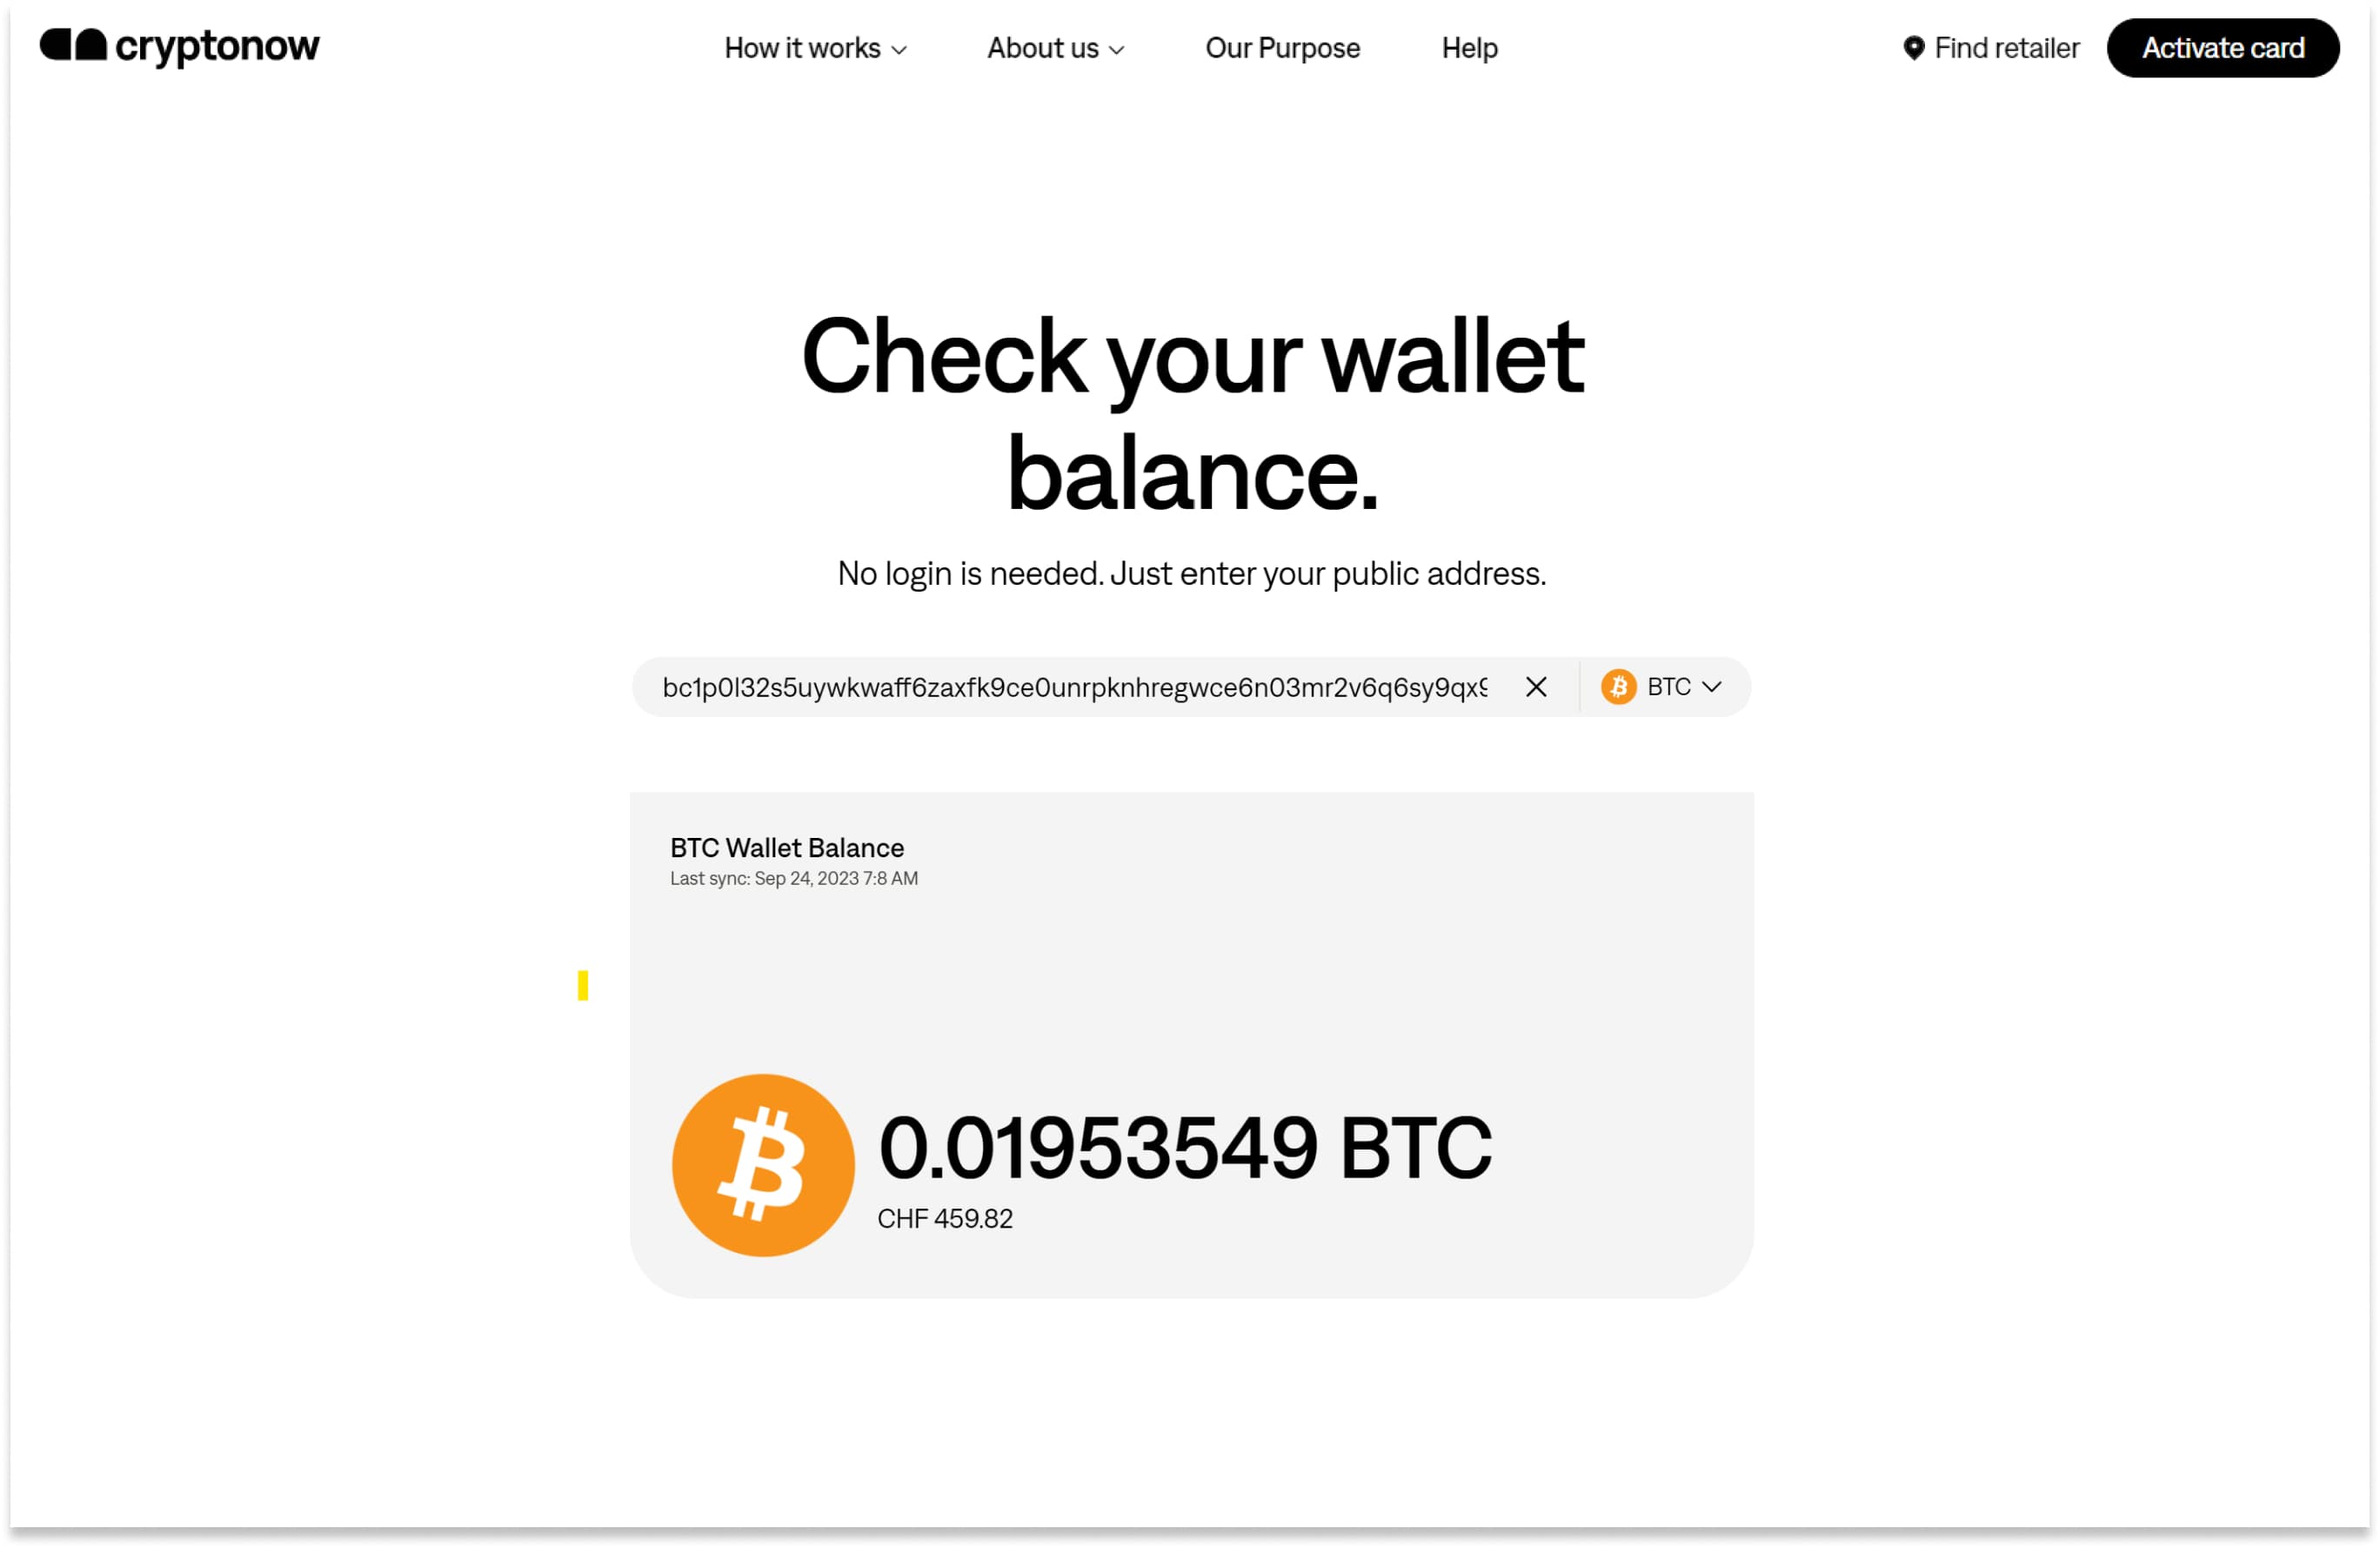 Results from the wallet balance tool: Displaying the queried wallet balance.